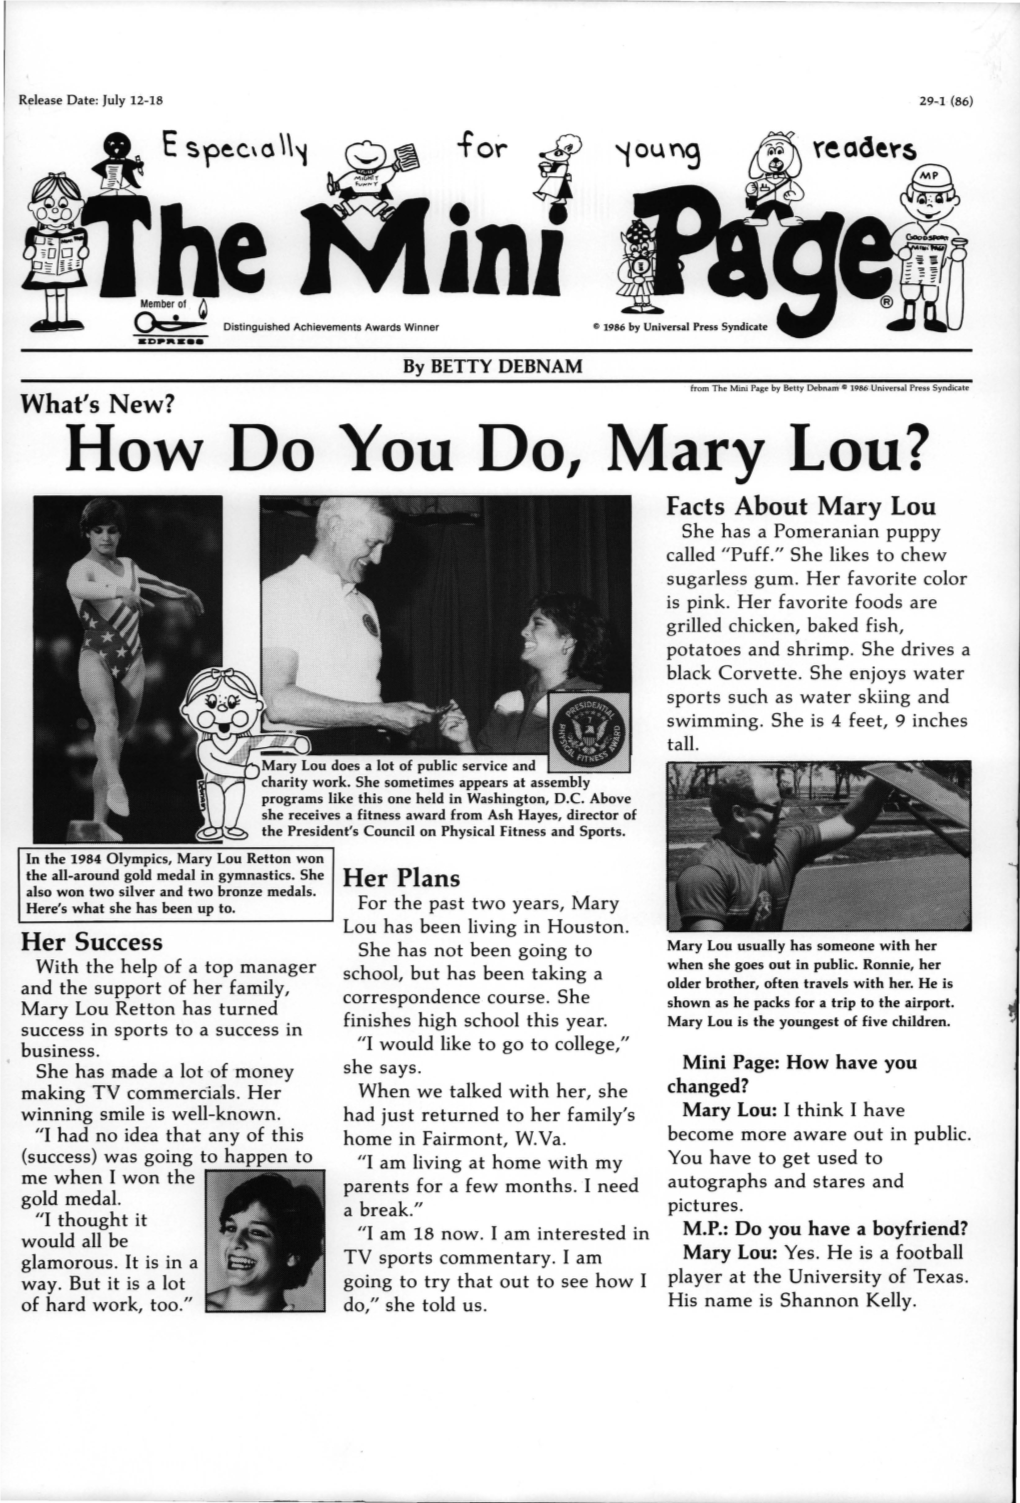 How Do You Do, Mary Lou? Facts About Mary Lou She Has a Pomeranian Puppy Called "Puff." She Likes to Chew Sugarless Gum